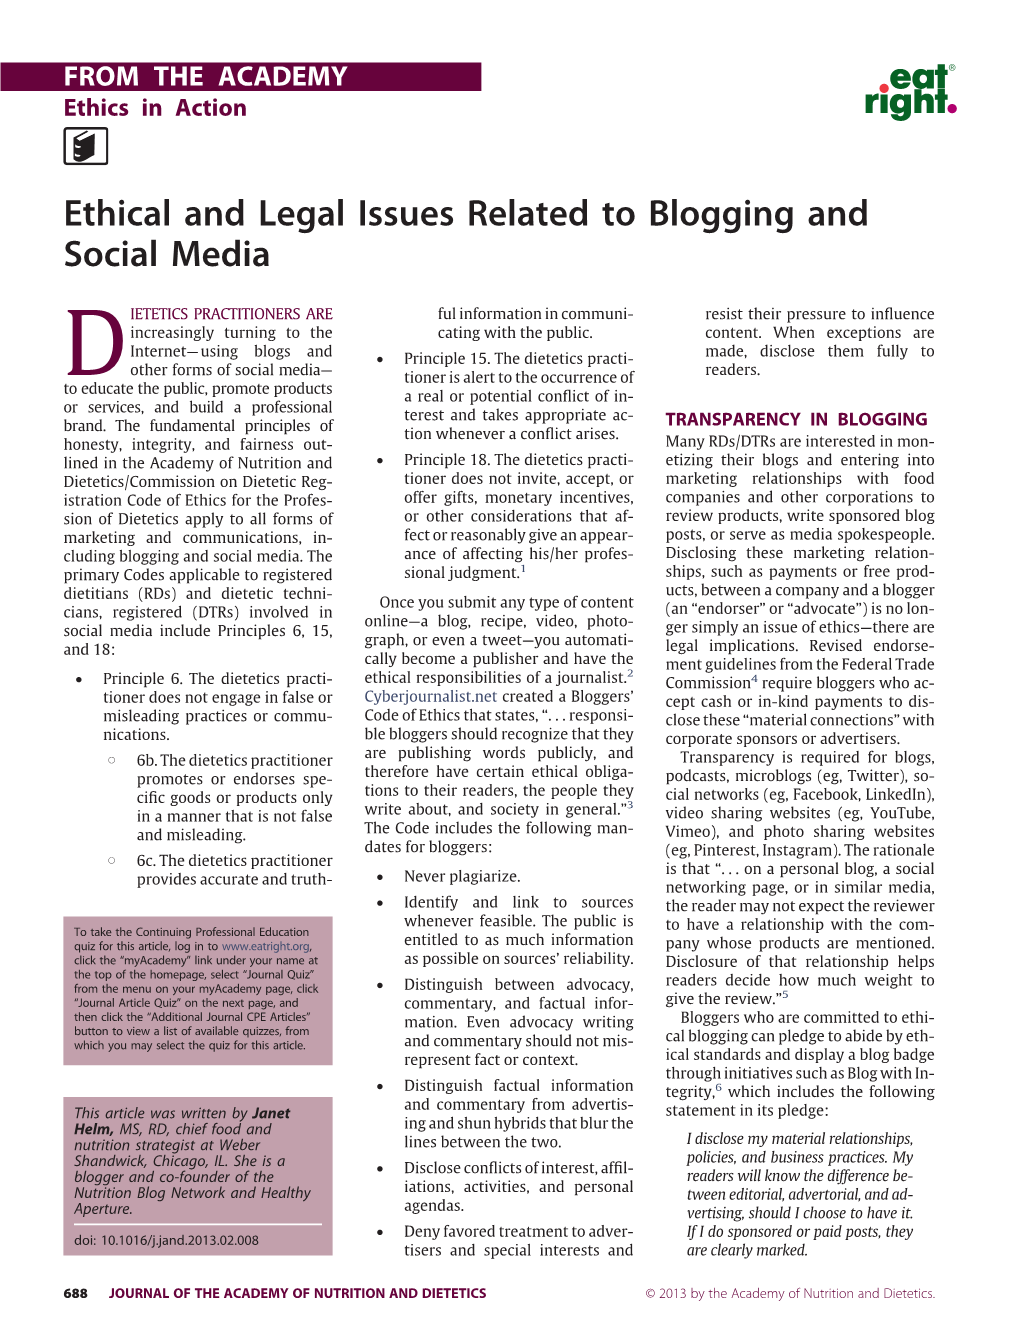 Ethical and Legal Issues Related to Blogging and Social Media